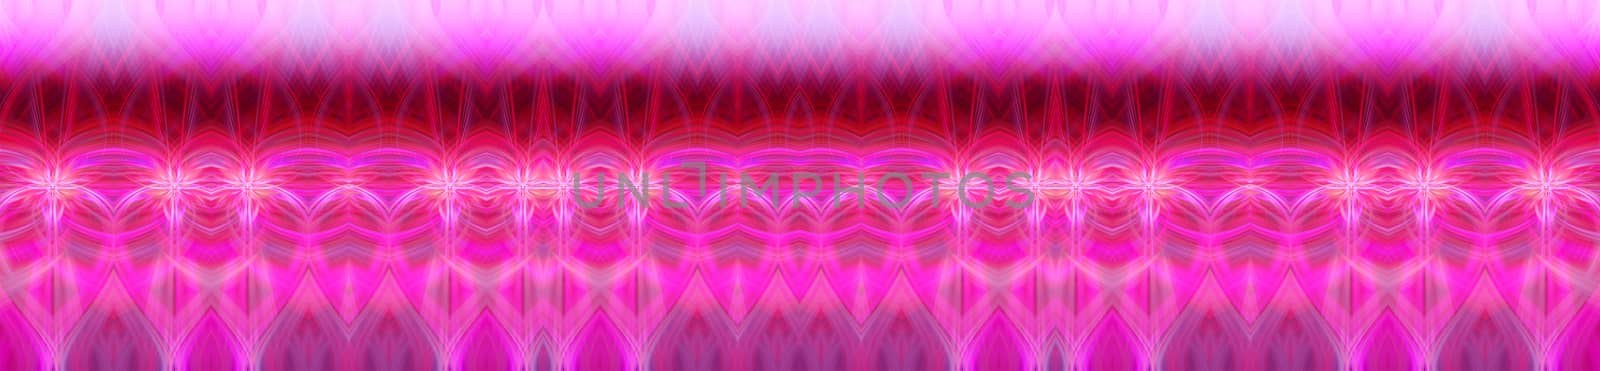 Beautiful abstract intertwined 3d fibers forming an ornament out of various symmetrical shapes. Purple, pink, red colors. Illustration. Panorama and banner size.